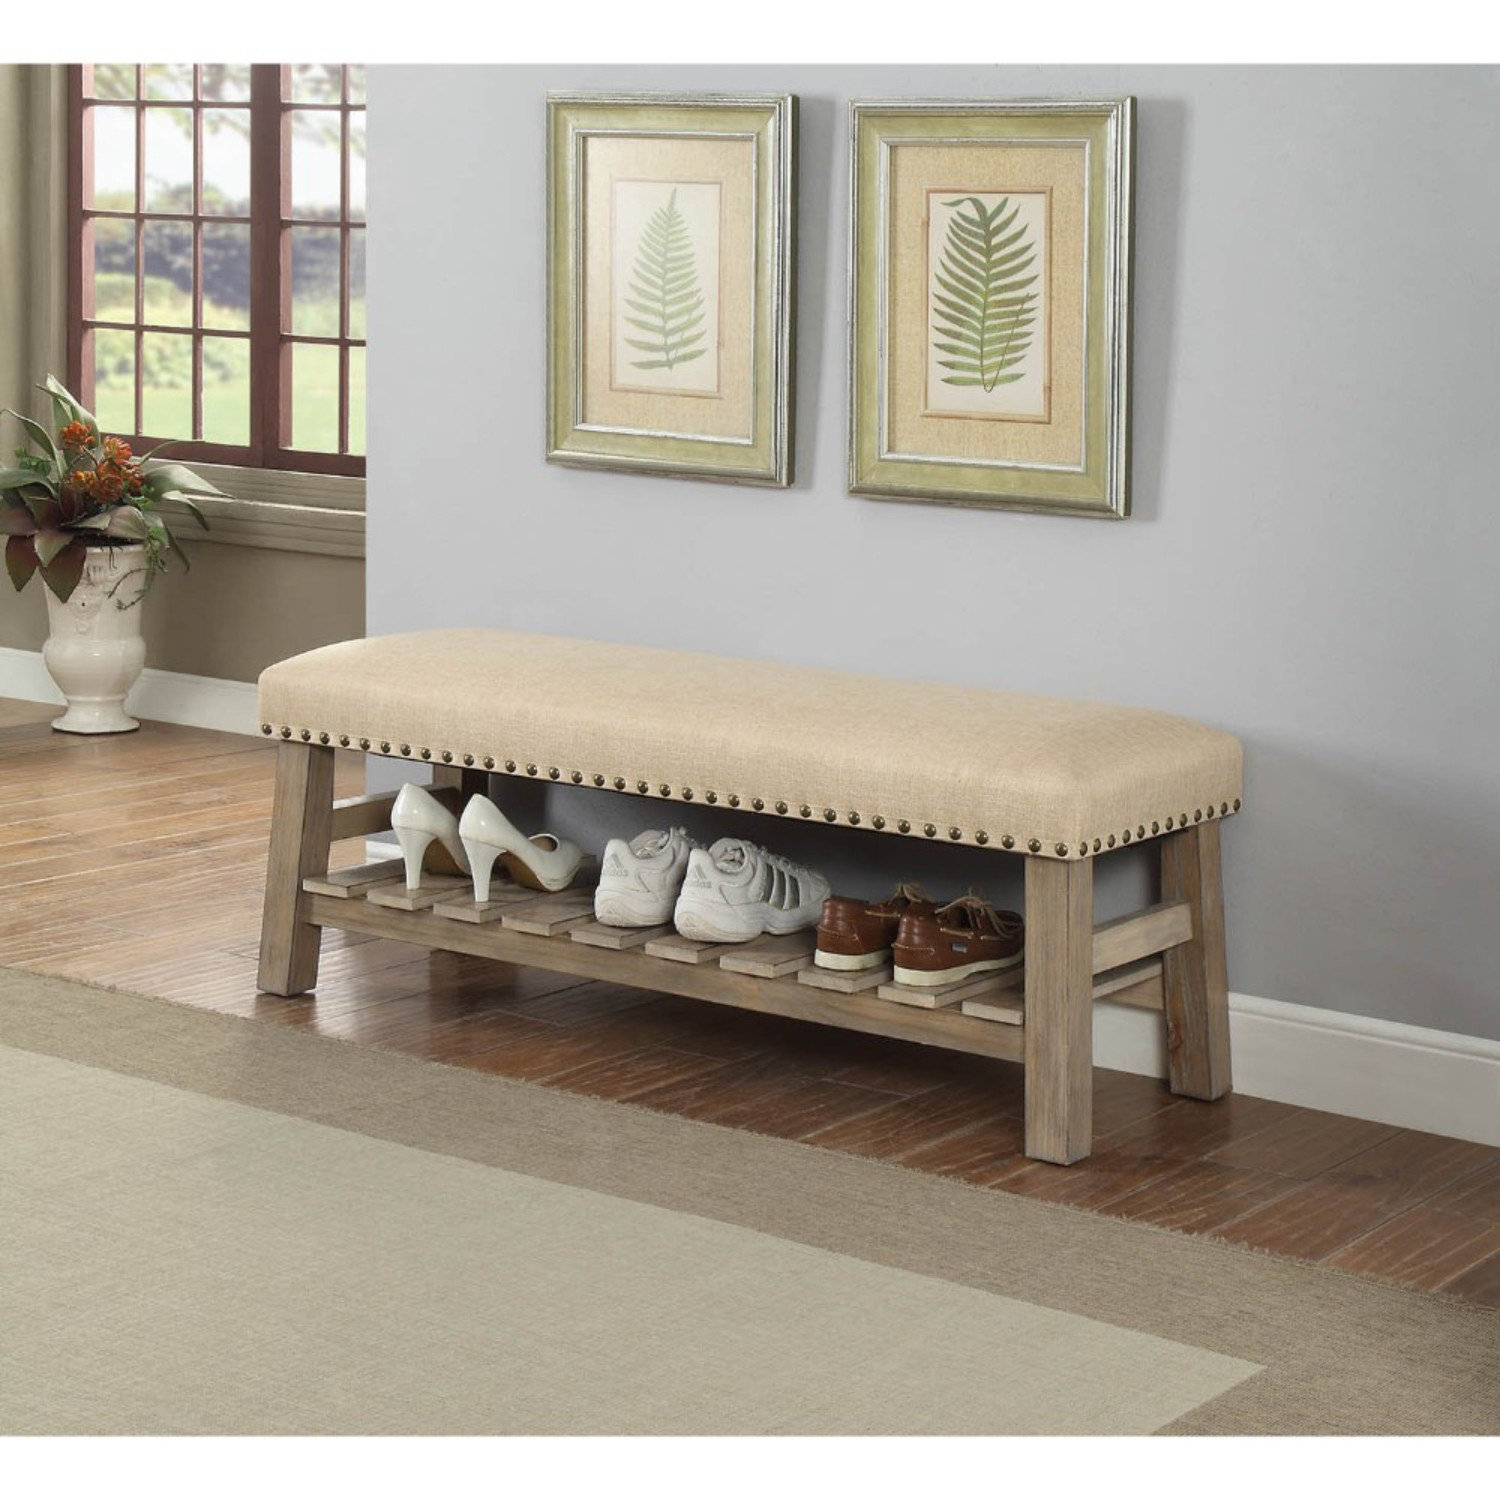 Millwood Pines Ally Upholstered Storage Bench Wayfair